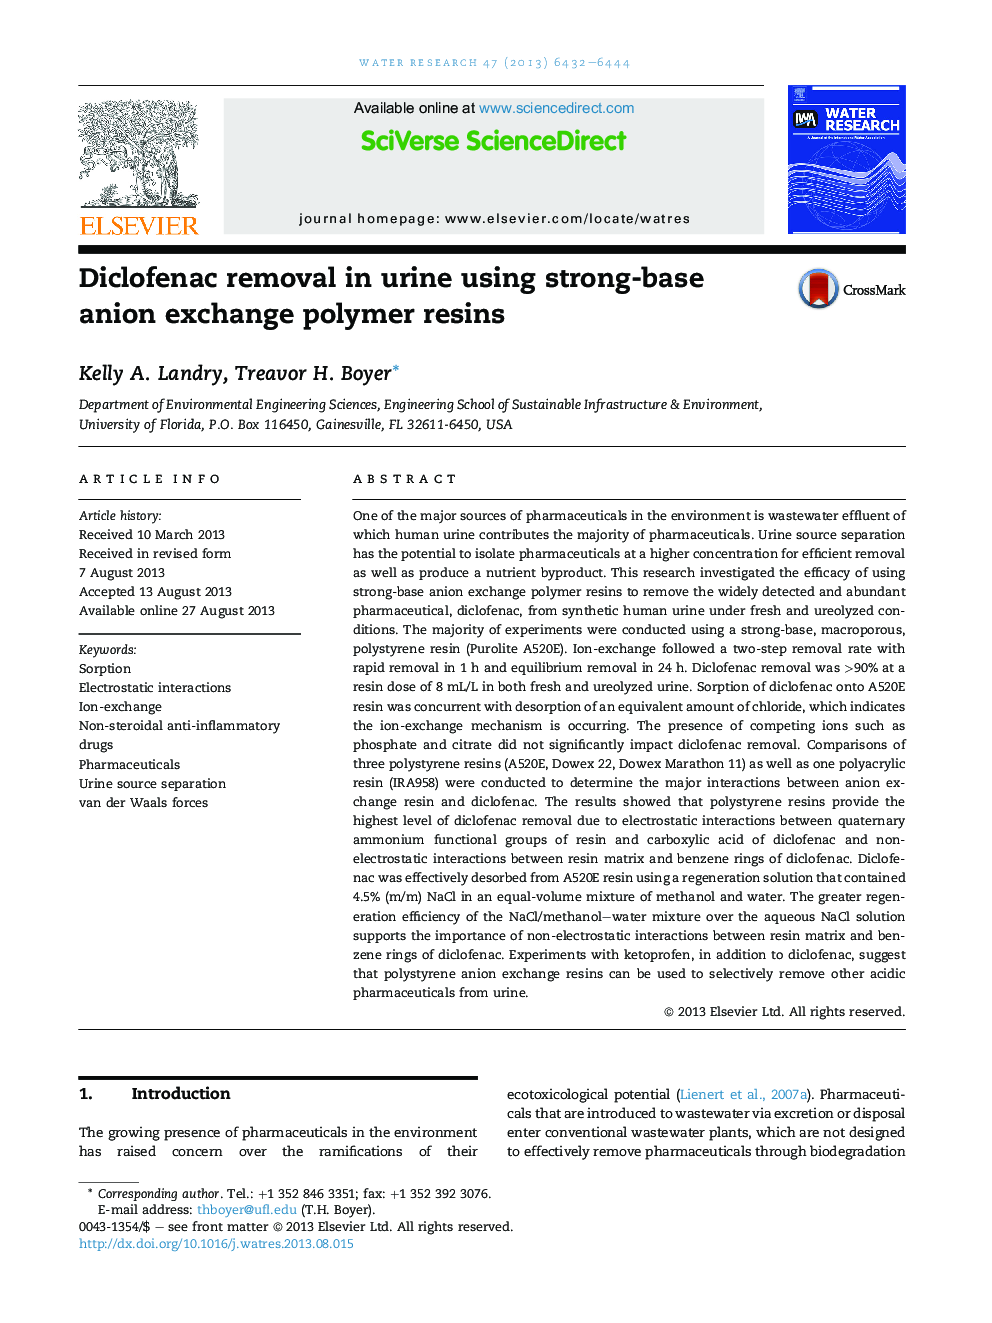 Diclofenac removal in urine using strong-base anion exchange polymer resins